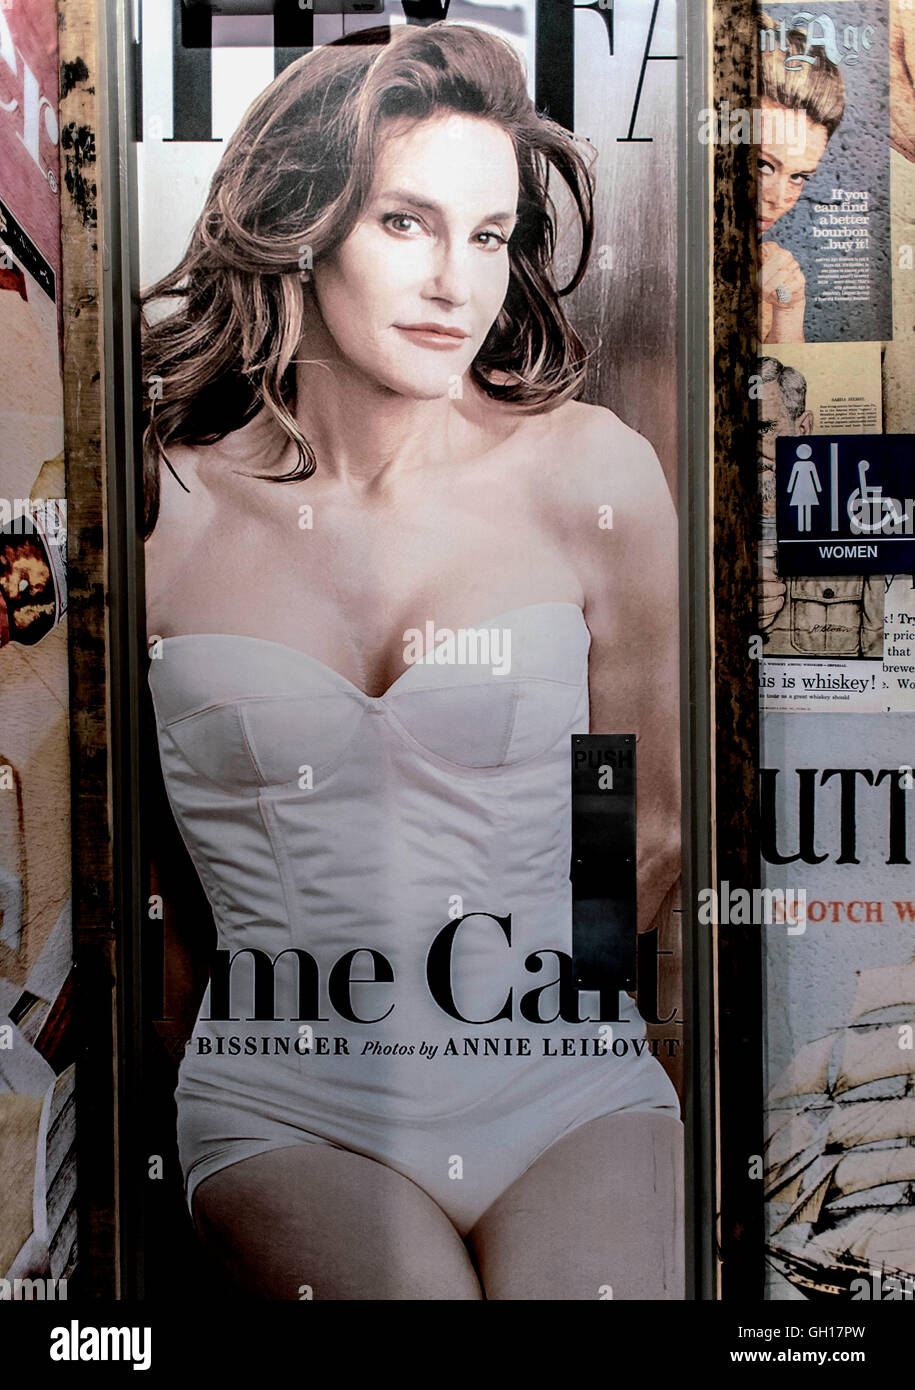 West Los Angeles, California, USA. 07th Aug, 2016. The newly-opened Nickel Bar on Santa Monica Boulevard employs pre and post-transition images of Caitlyn Jenner on its bathroom doors. The men's rest room door features a reproduction of the BRUCE JENNER Wheaties box produced after his gold medal win in the decathlon in 1976, and the ladies room is decorated with the Vanity Fair cover photograph of CAITLYN JENNER by Annie Leibovitz. Credit:  Brian Cahn/ZUMA Wire/Alamy Live News Stock Photo